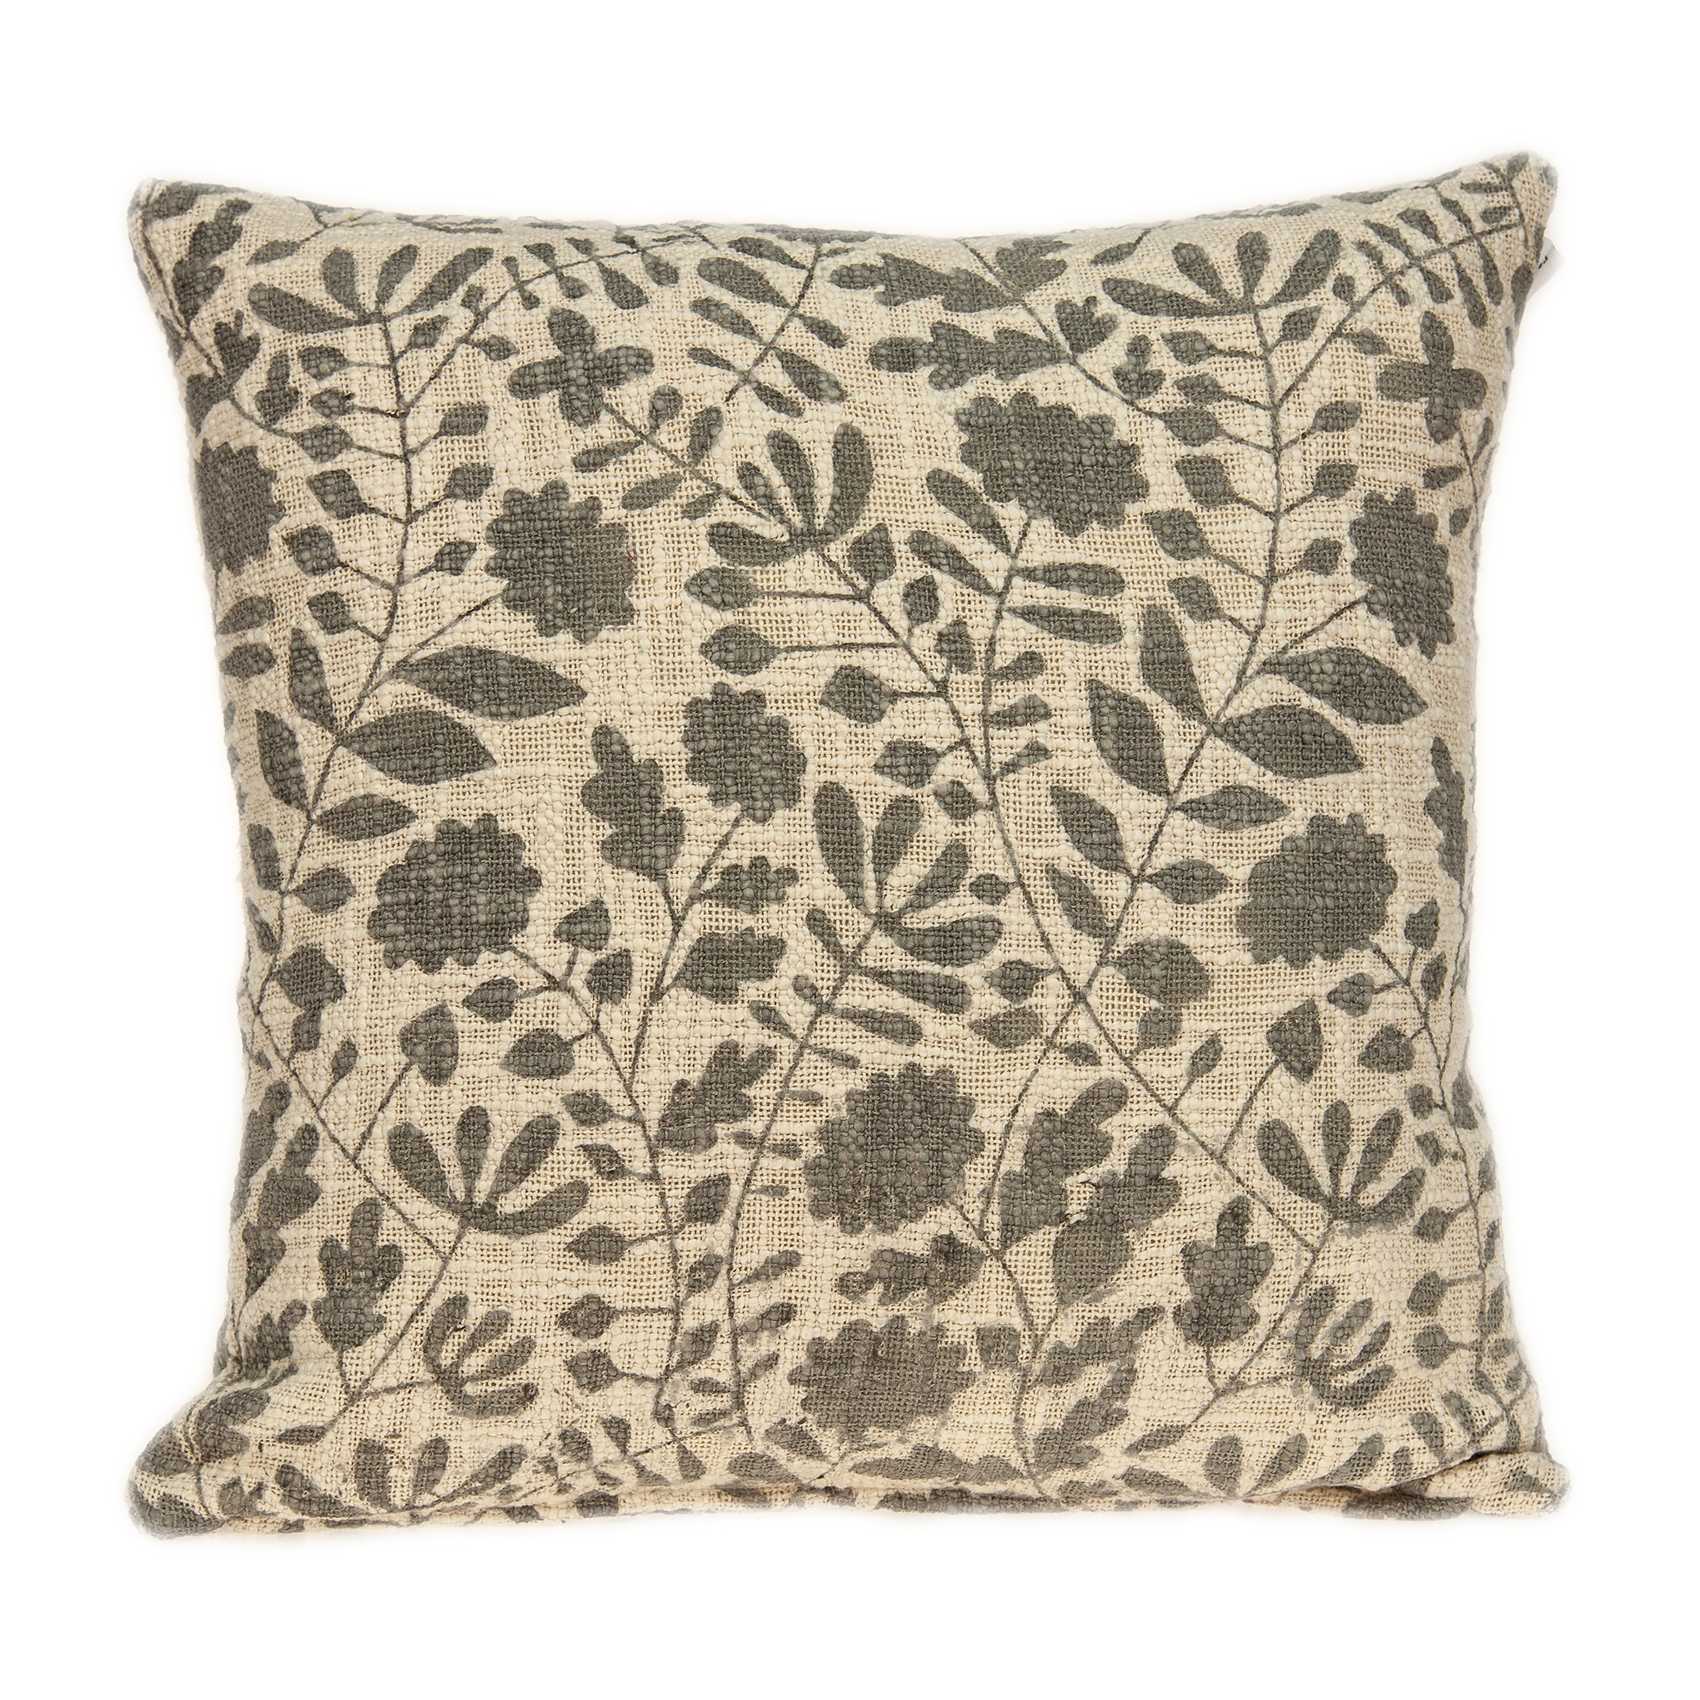 18" x 7" x 18" Transitional Beige Floral Print Pillow Cover With Down Insert